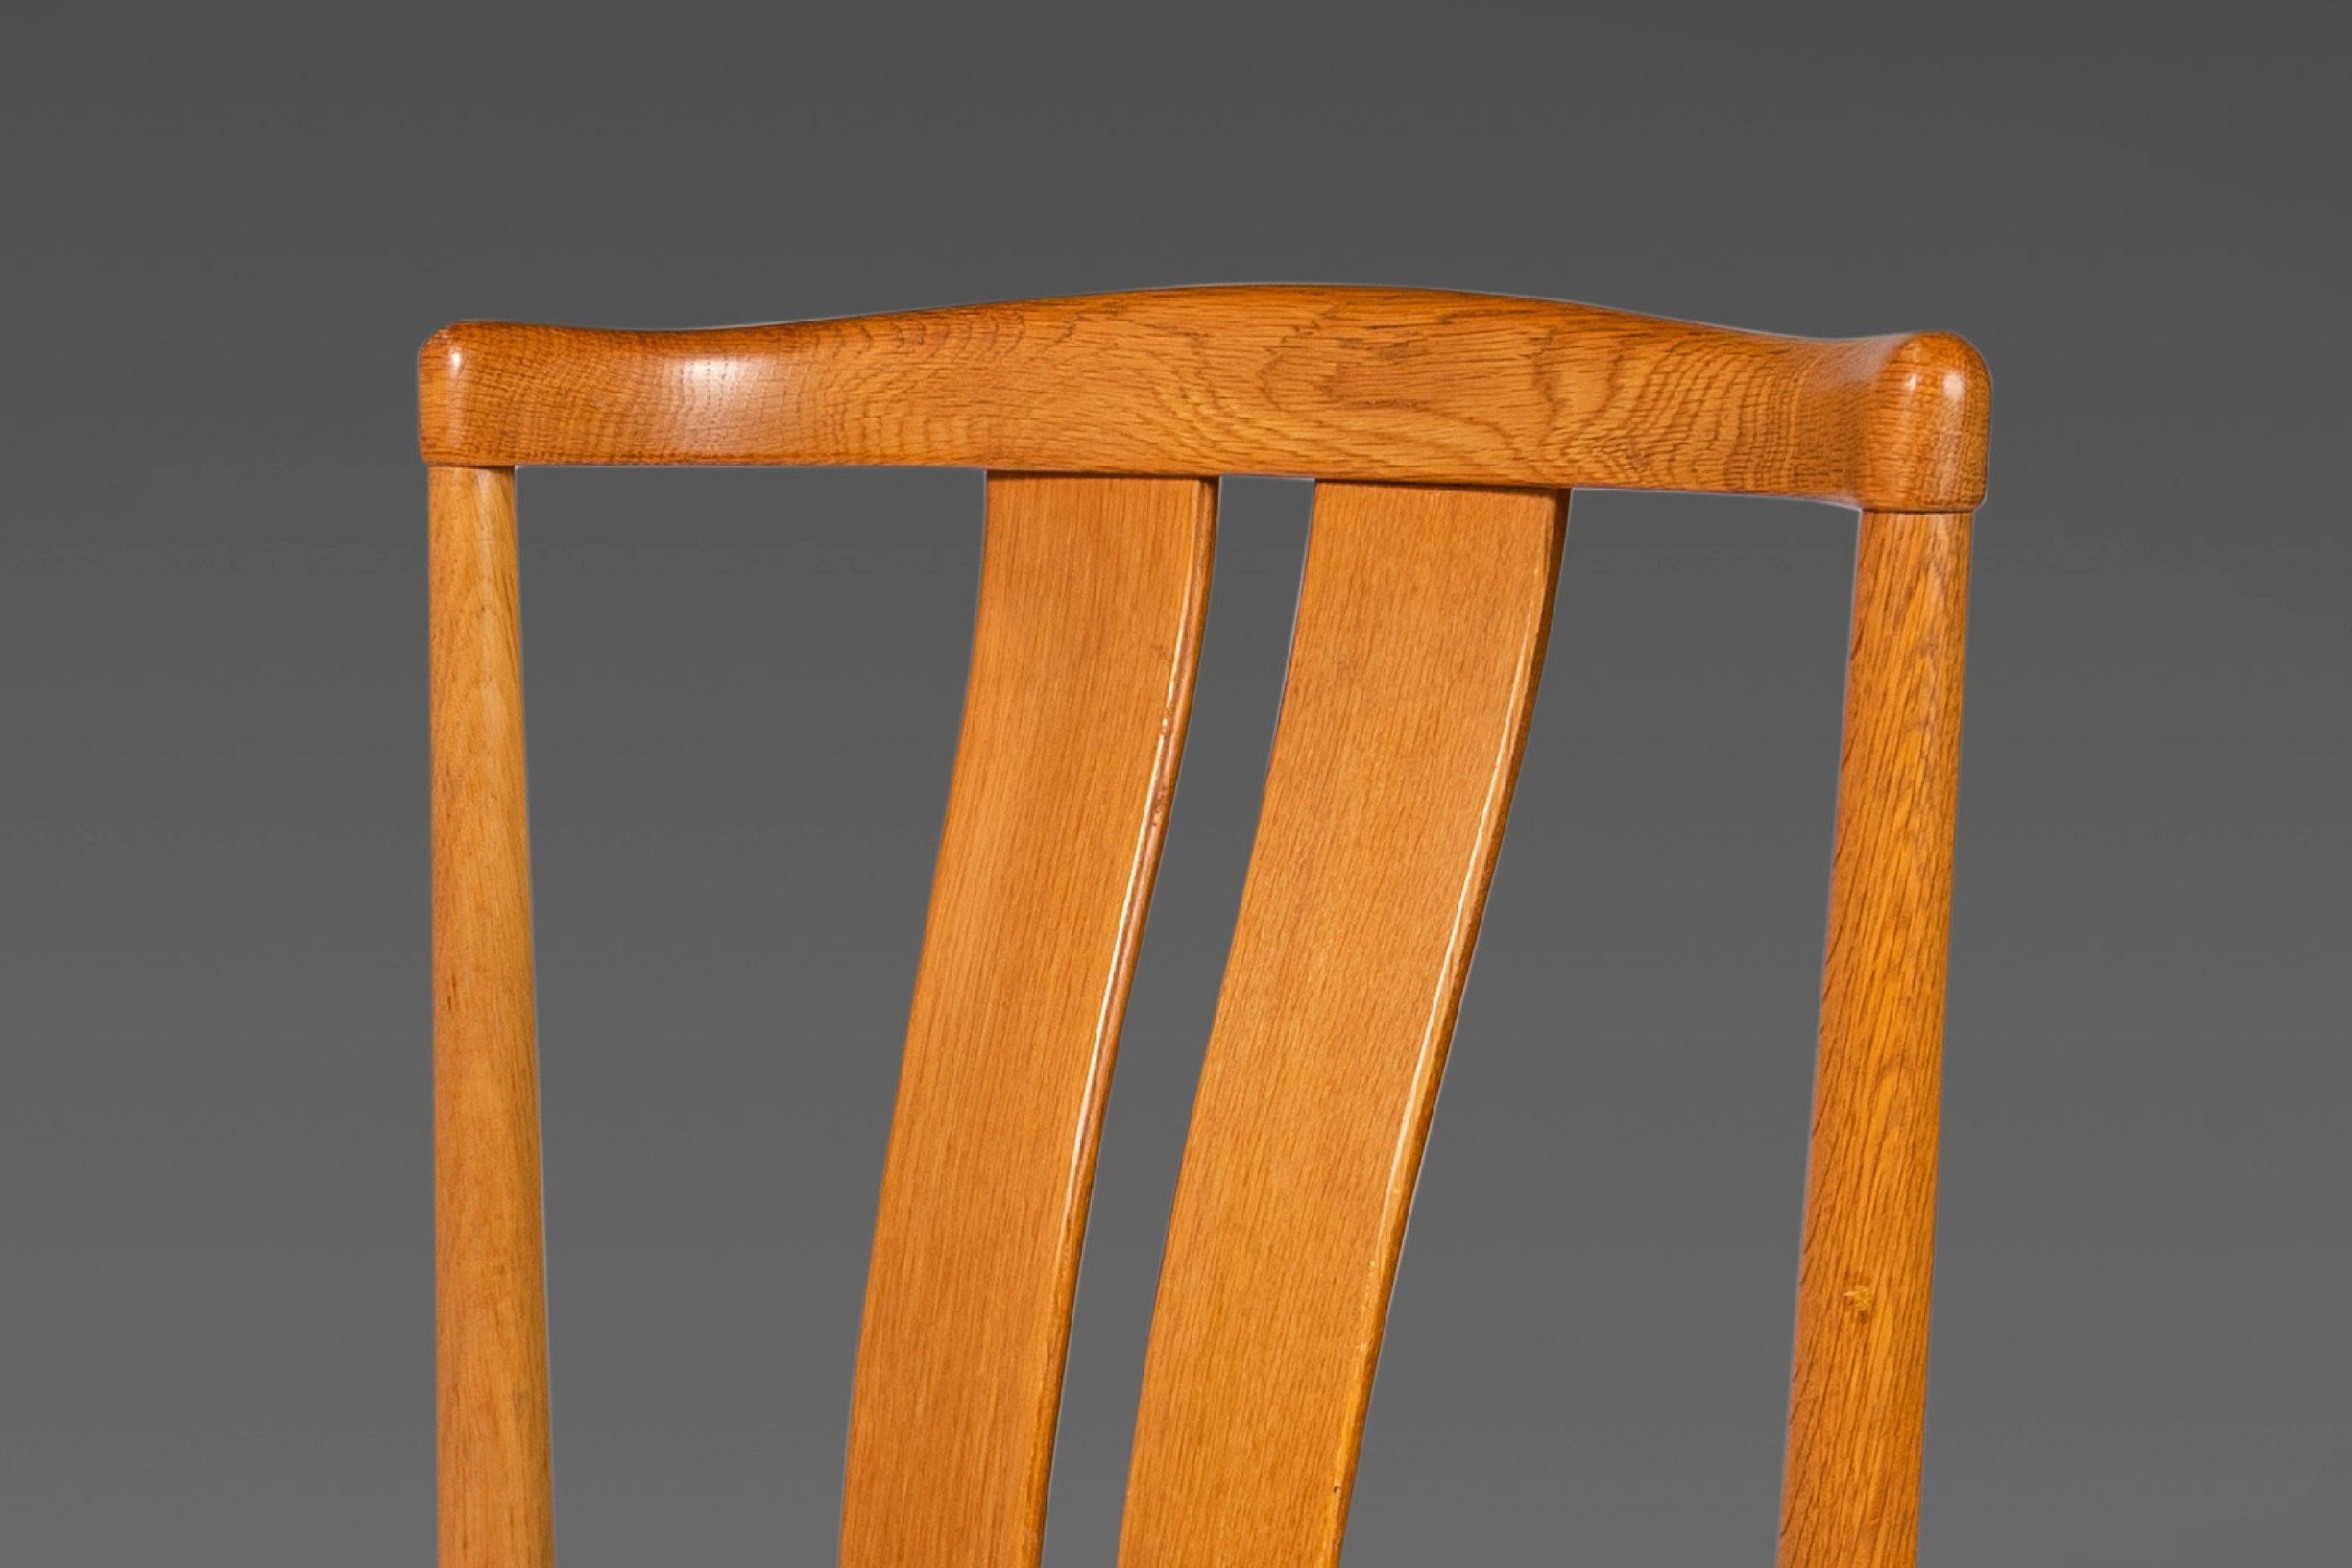 Set of Six (6) Danish Dining Chairs by Vamdrup Stolefabrik in Oak, c. 1970s For Sale 3